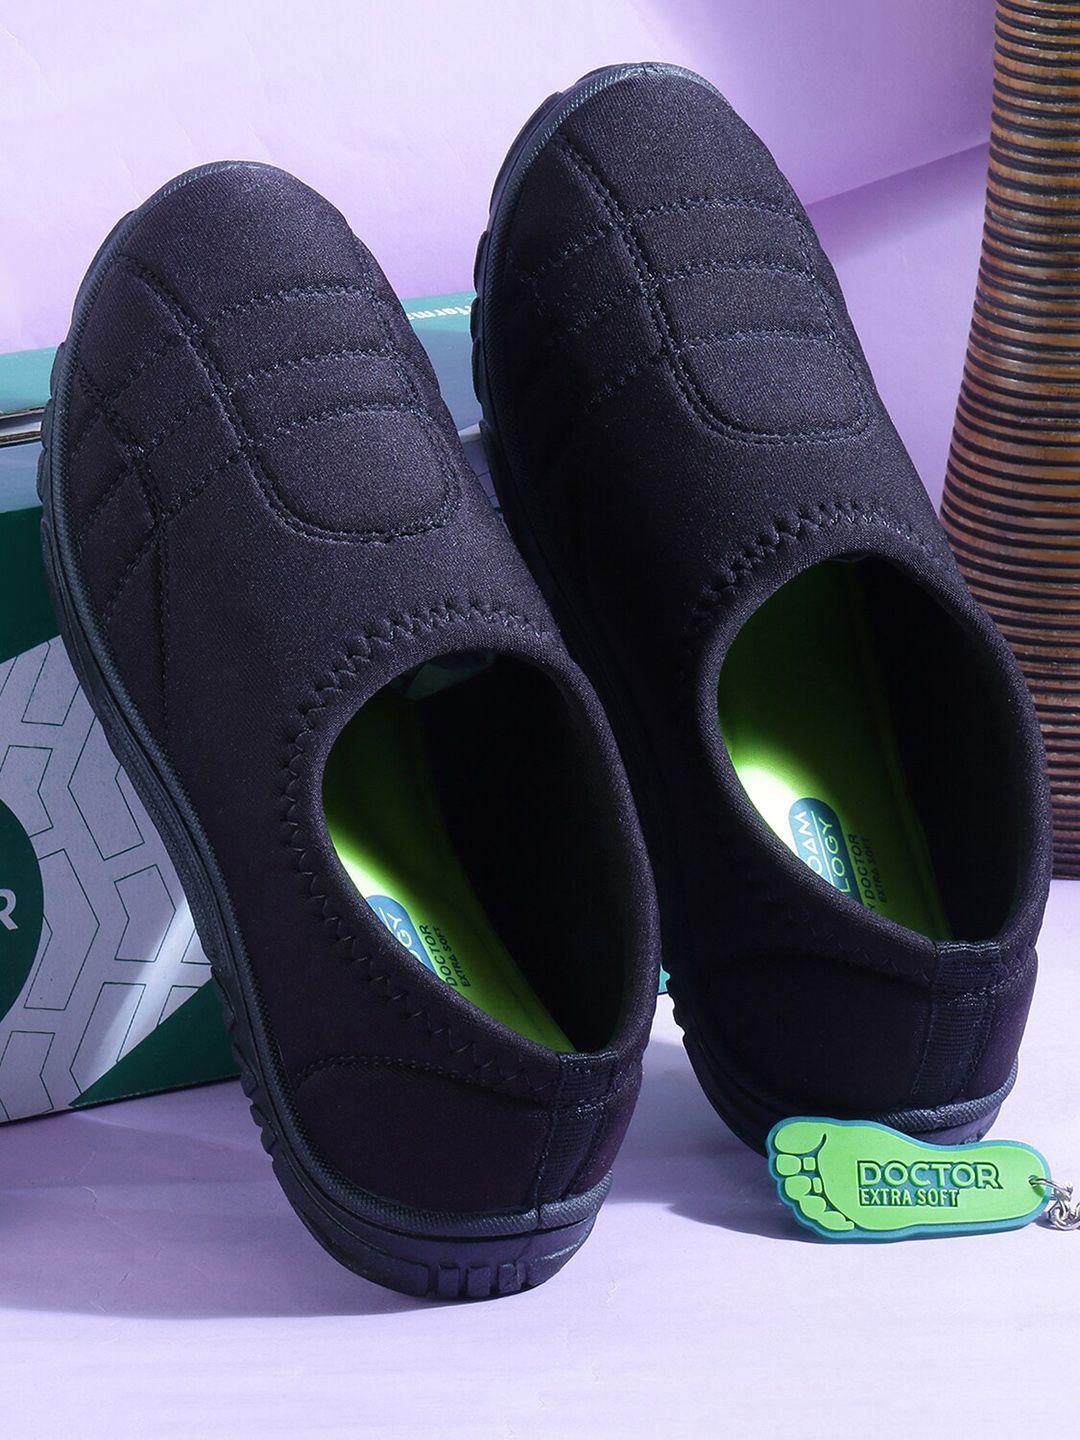 doctor extra soft women slip-on walking non-marking shoes